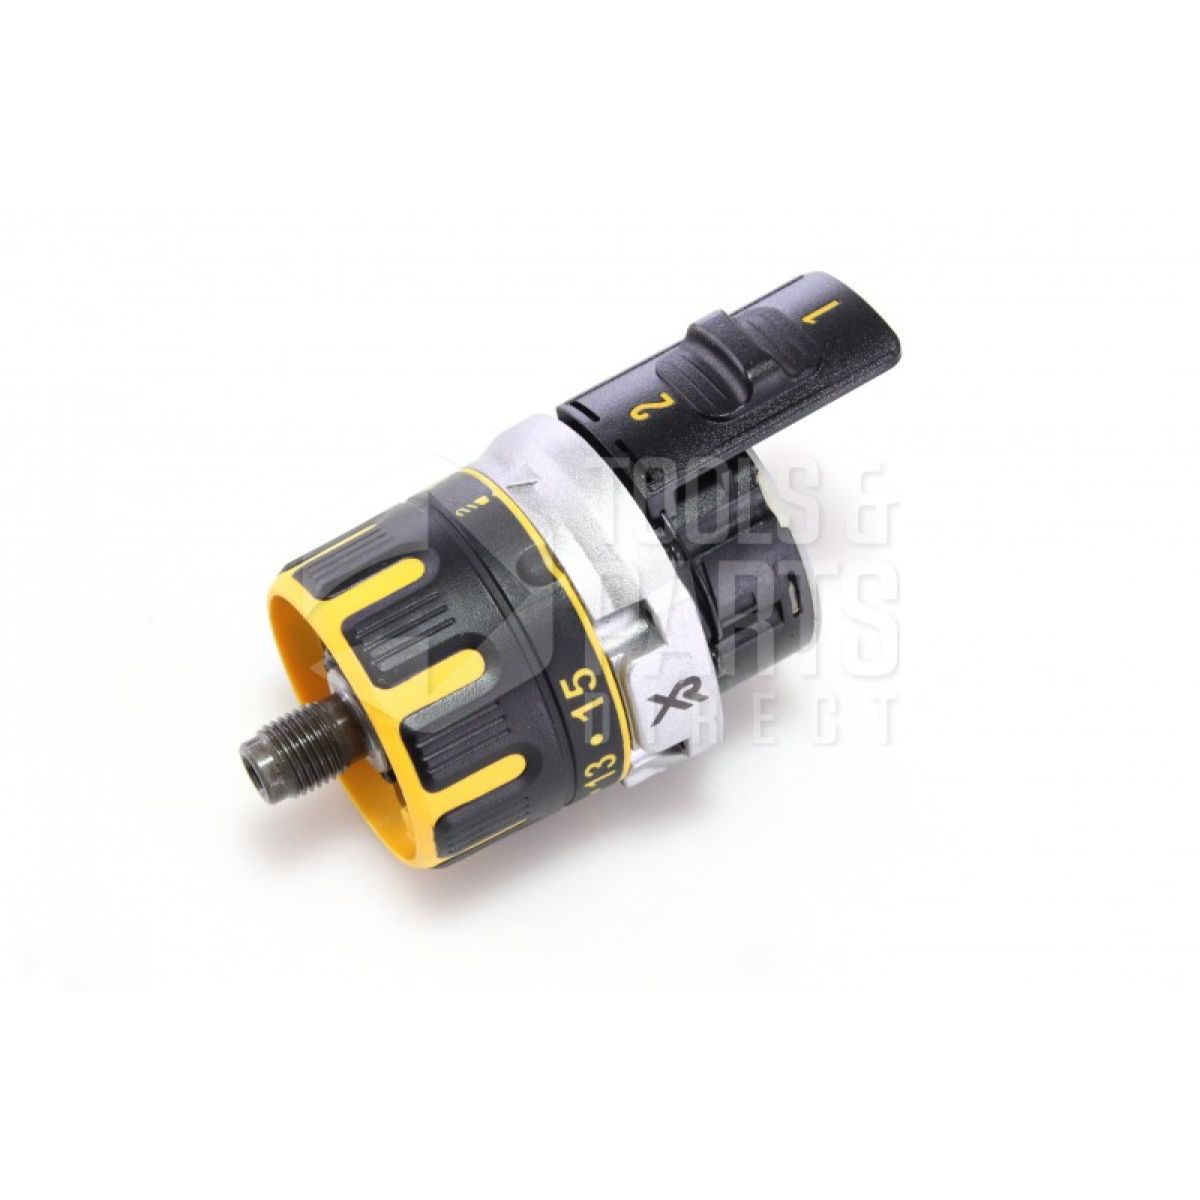 Dewalt Dcd790 Drill 18V Li-Ion (Type 10) Spare Parts Spare | Tools And Parts